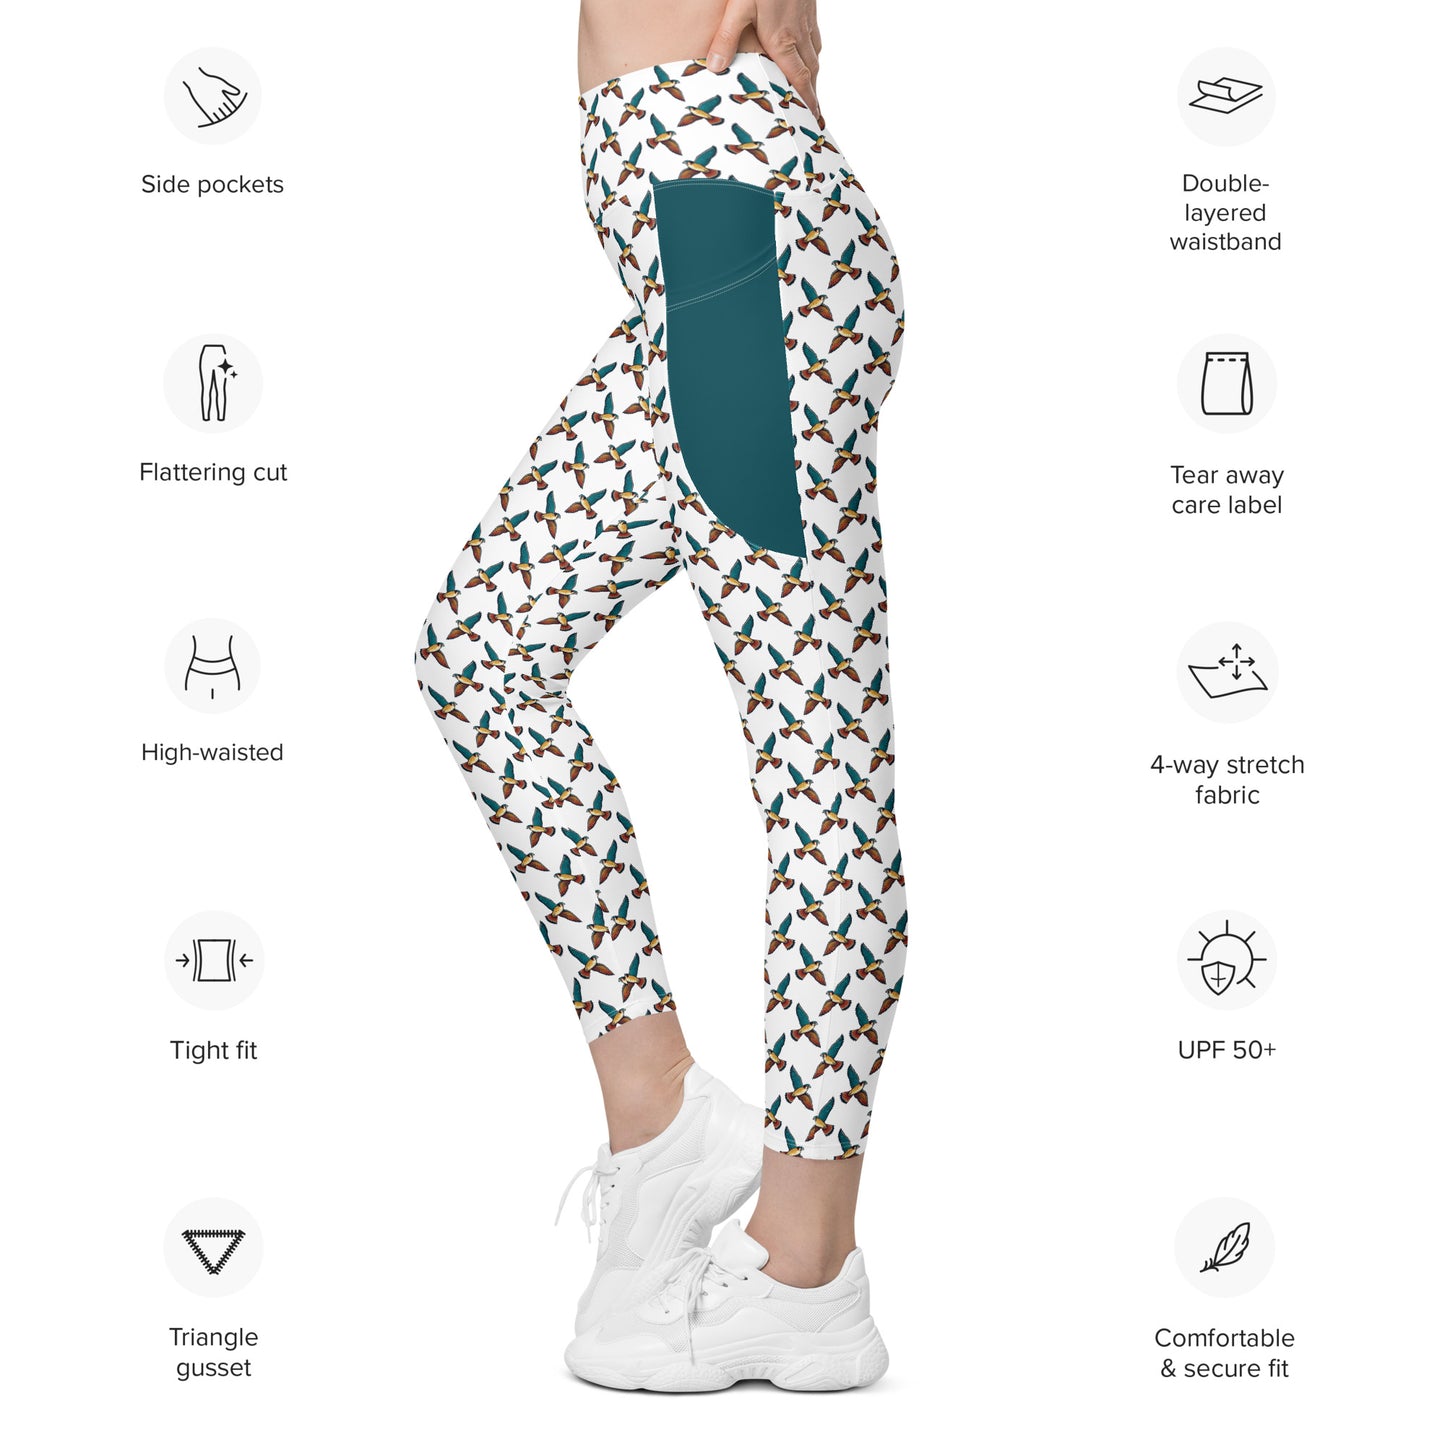 Peregrine Falcon Leggings with Pockets